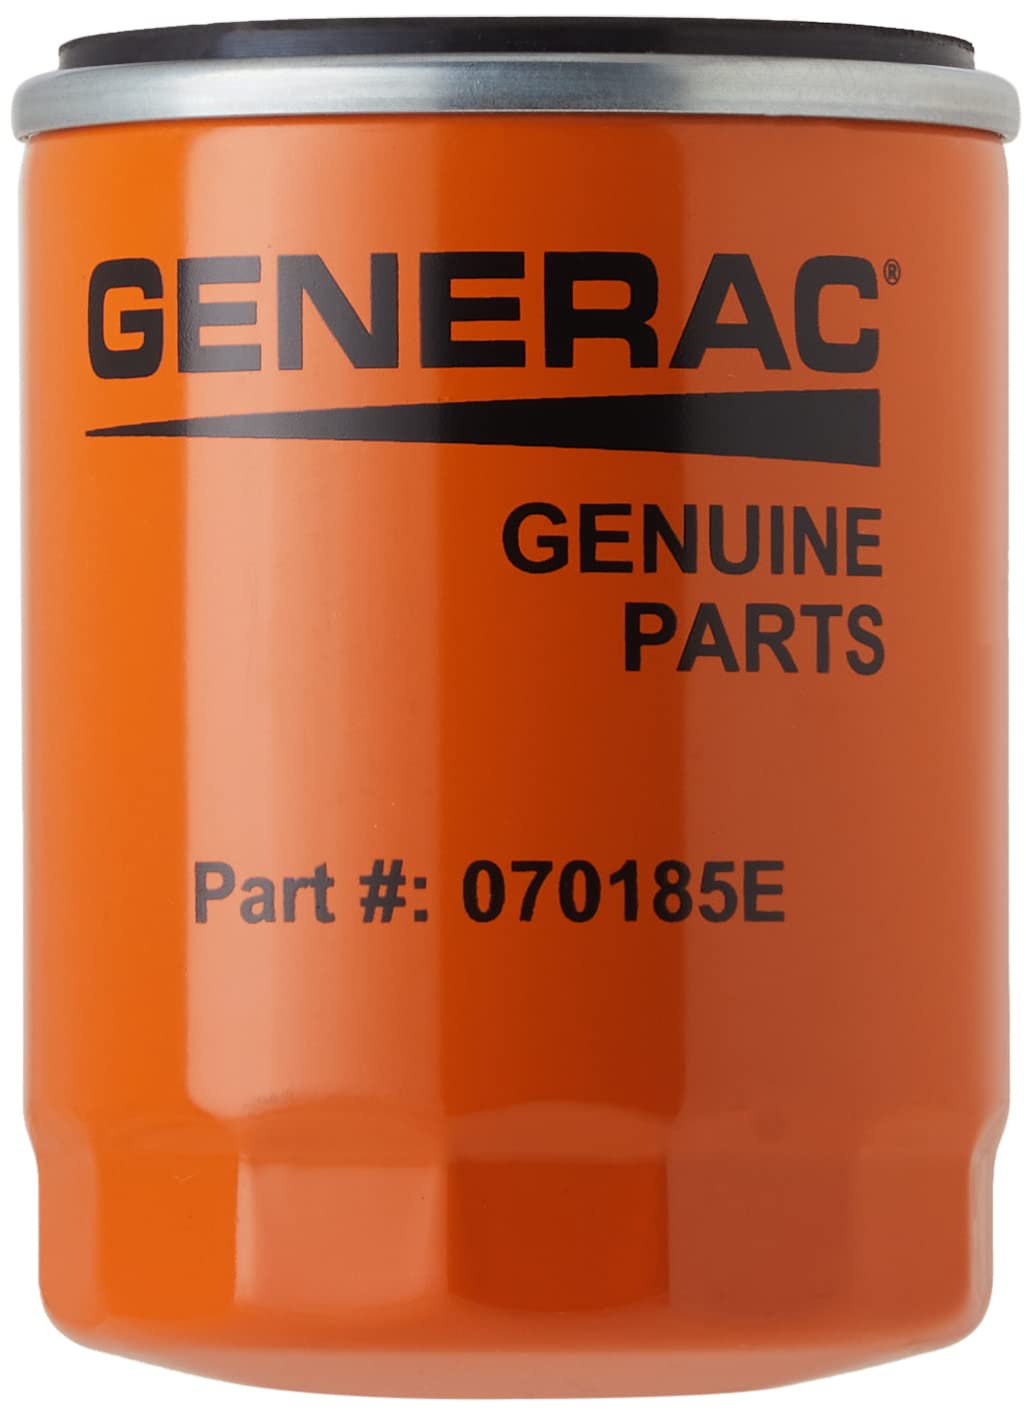 Generac 5664 Air Cooled Home Standby Generator Maintenance Kit, 13kW-17kW, 990cc - Complete Care for Reliable Power